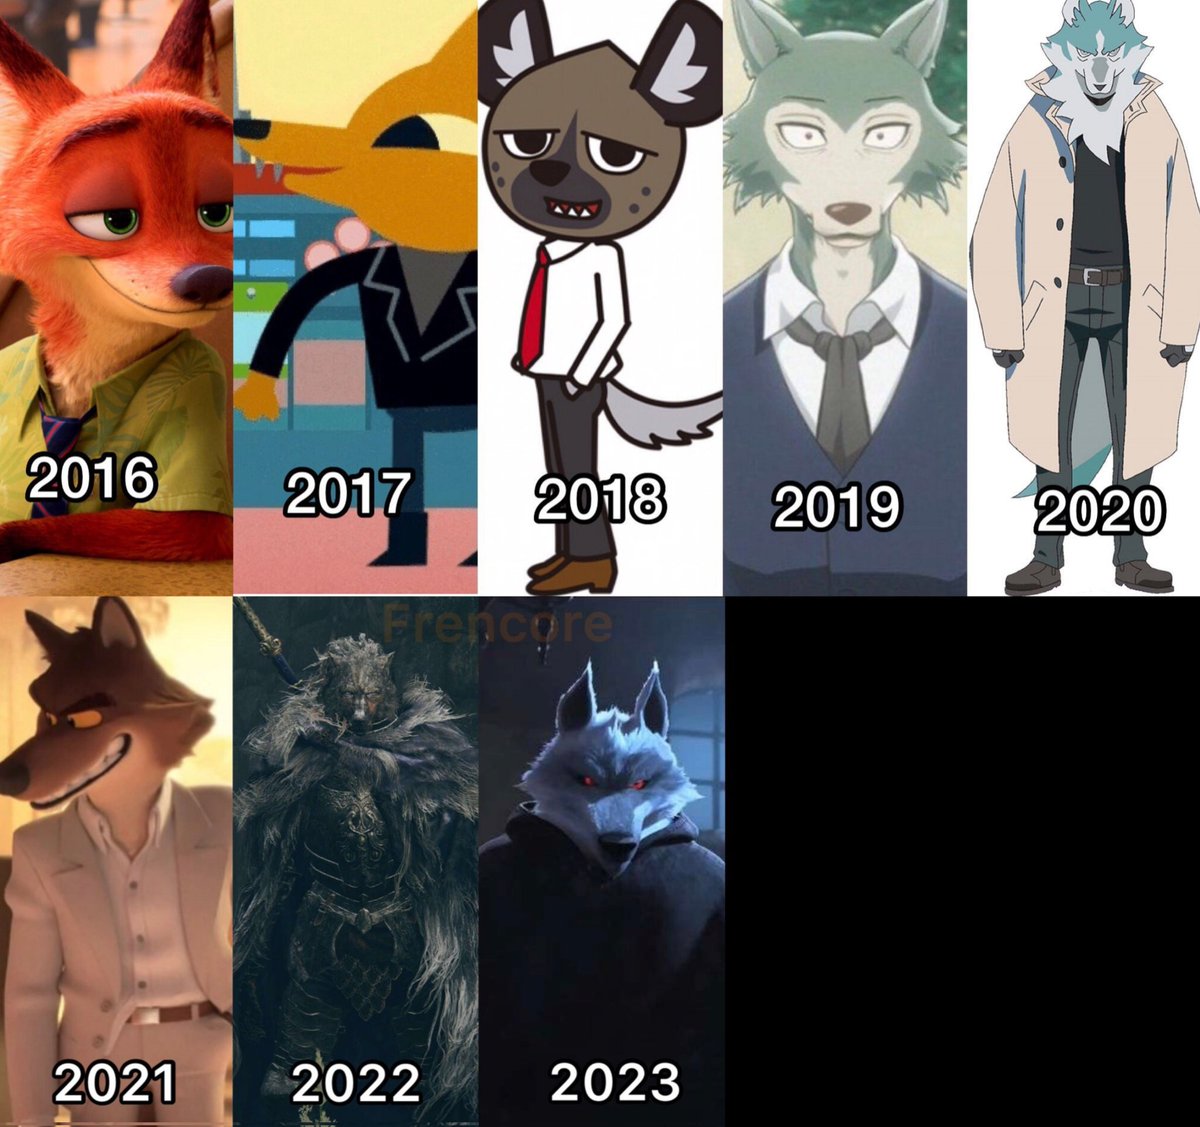 Who do you think will take this year's furry husband spot?